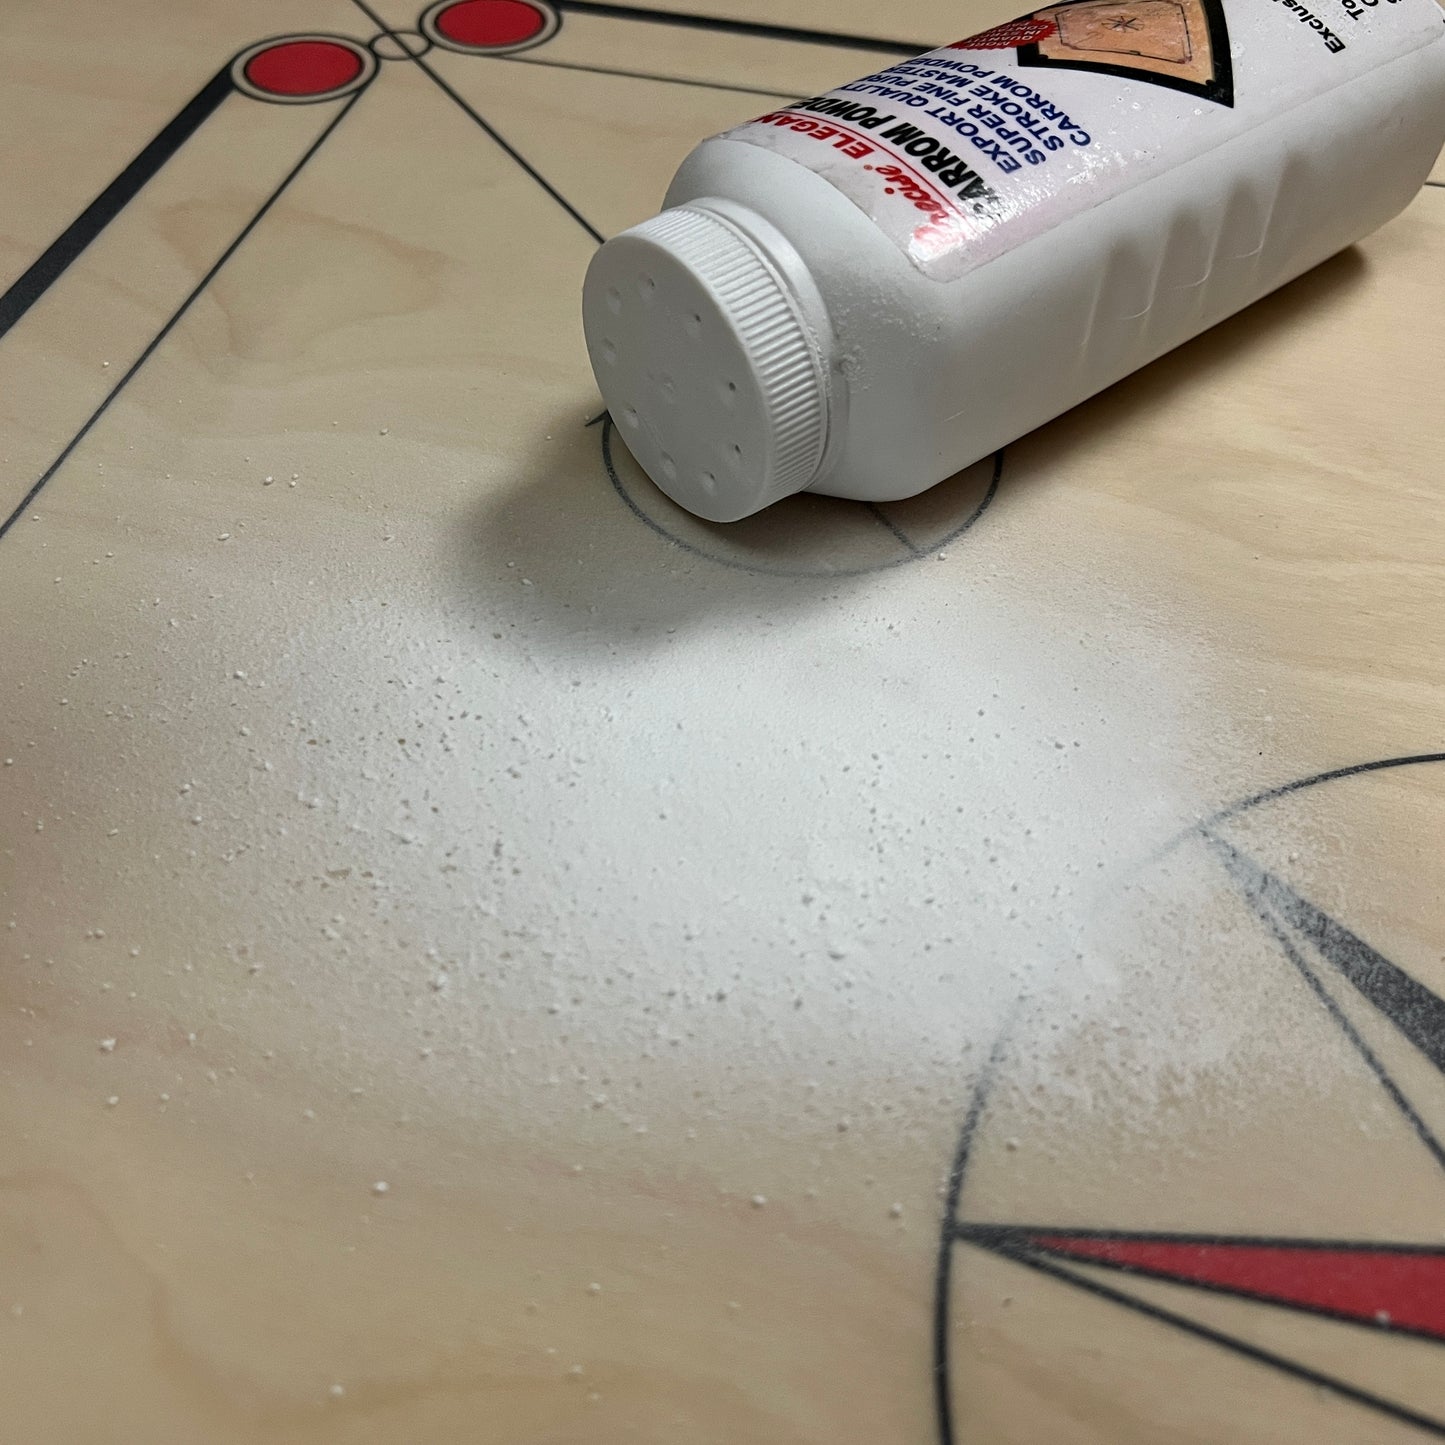 Specially formulated Precise Elegant carrom powder, 180g refillable bottle with a sifter cap, enhancing the playing surface of superior quality carrom boards, available exclusively at Black Ash Sports.